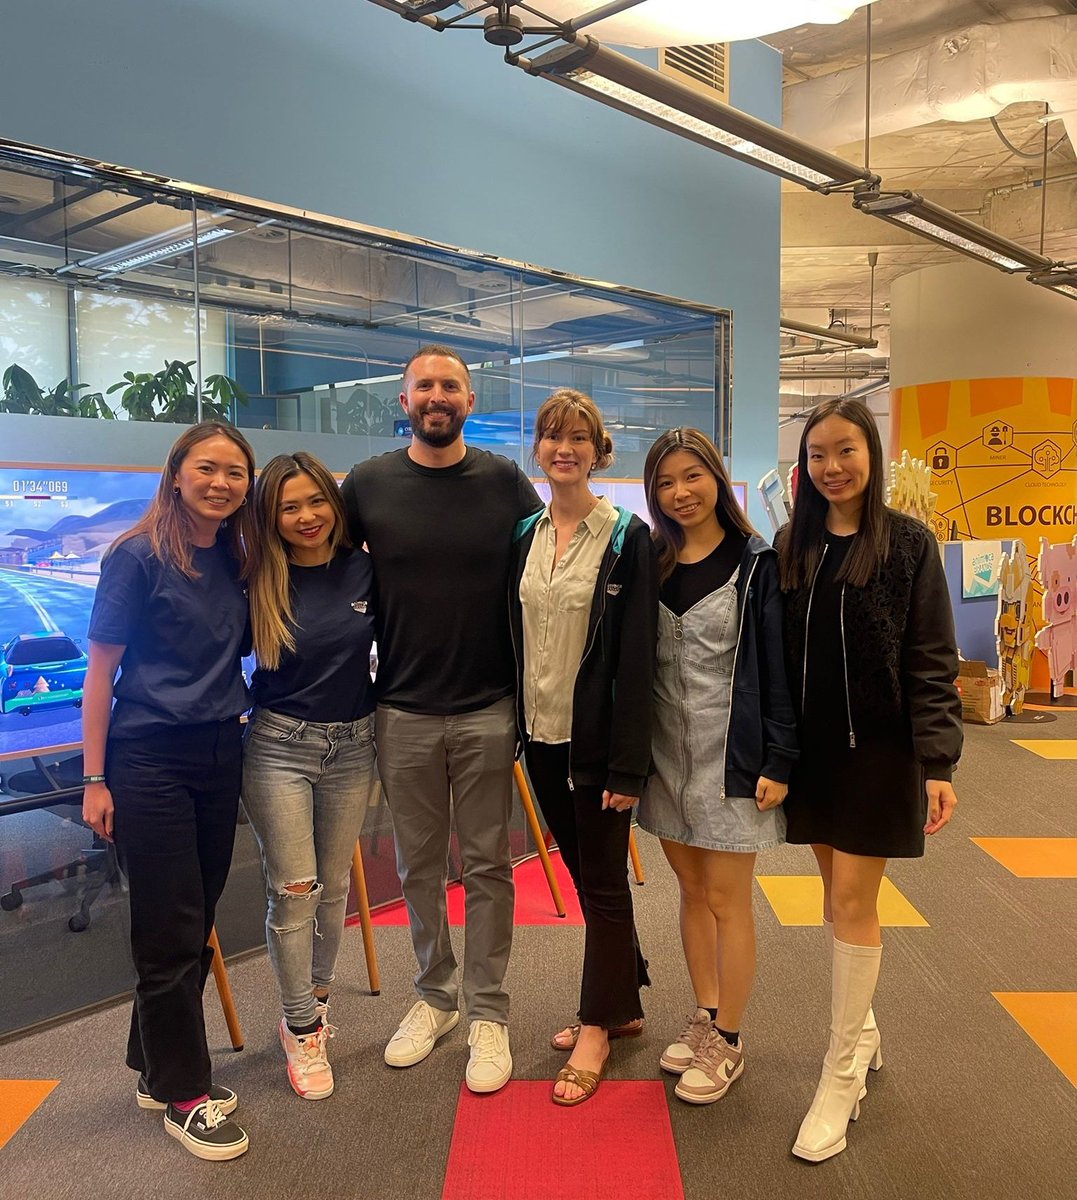 Gm! 🌞 What a crazy week of #buidling 🛠️ So glad to have had the chance to welcome @BrianDEvans at the @animocabrands office 💙🦄 Stay tuned for our upcoming interview together! #Bitcoin #Bitcoinseries #contentmachine